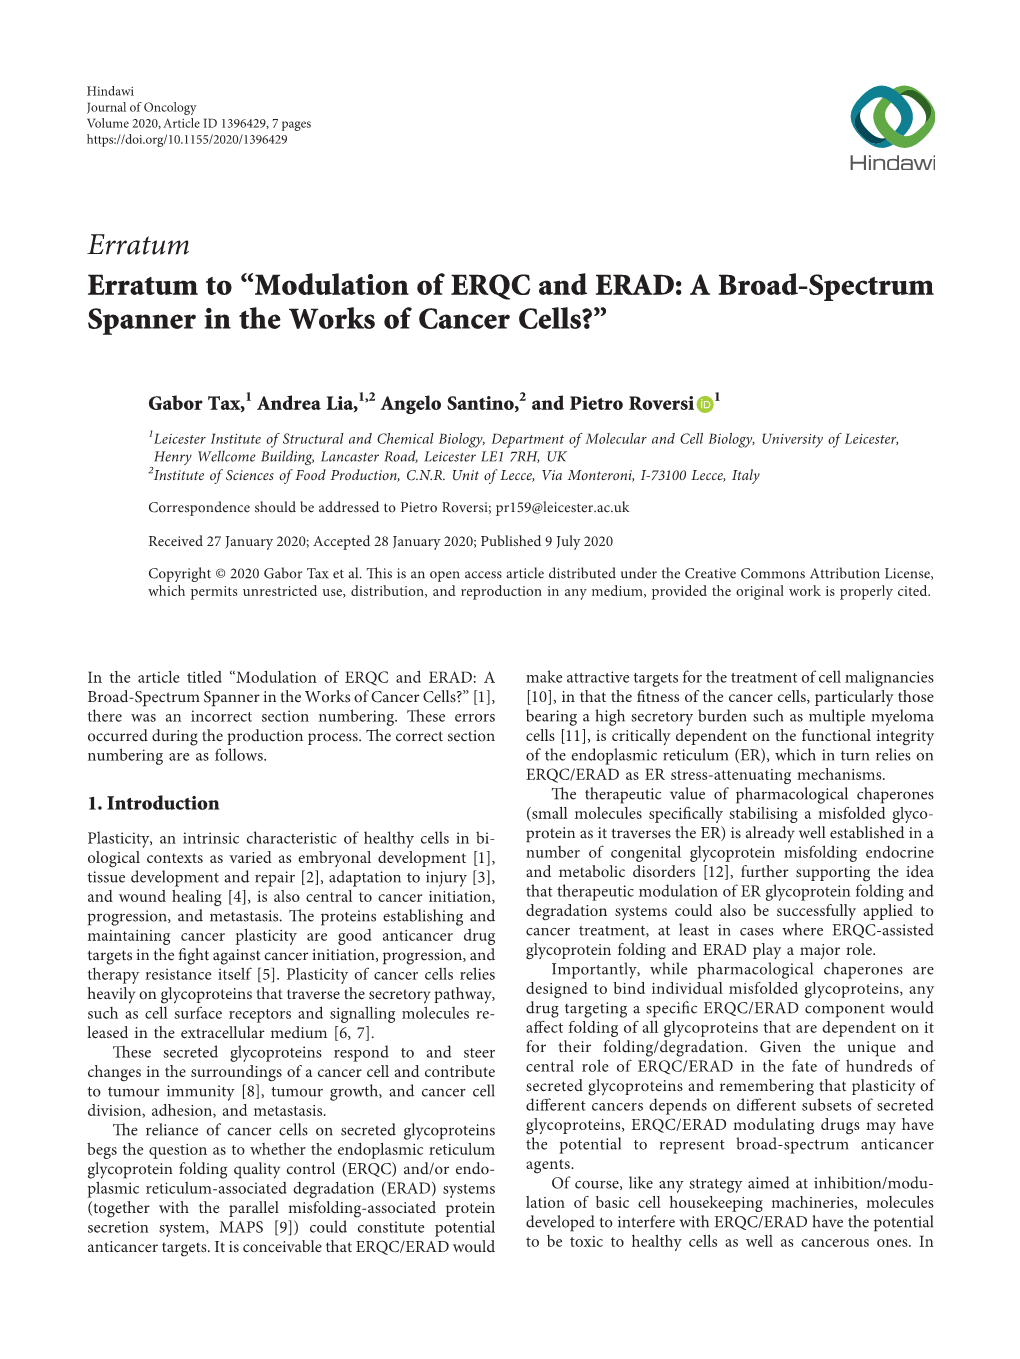 Modulation of ERQC and ERAD: a Broad-Spectrum Spanner in the Works of Cancer Cells?”